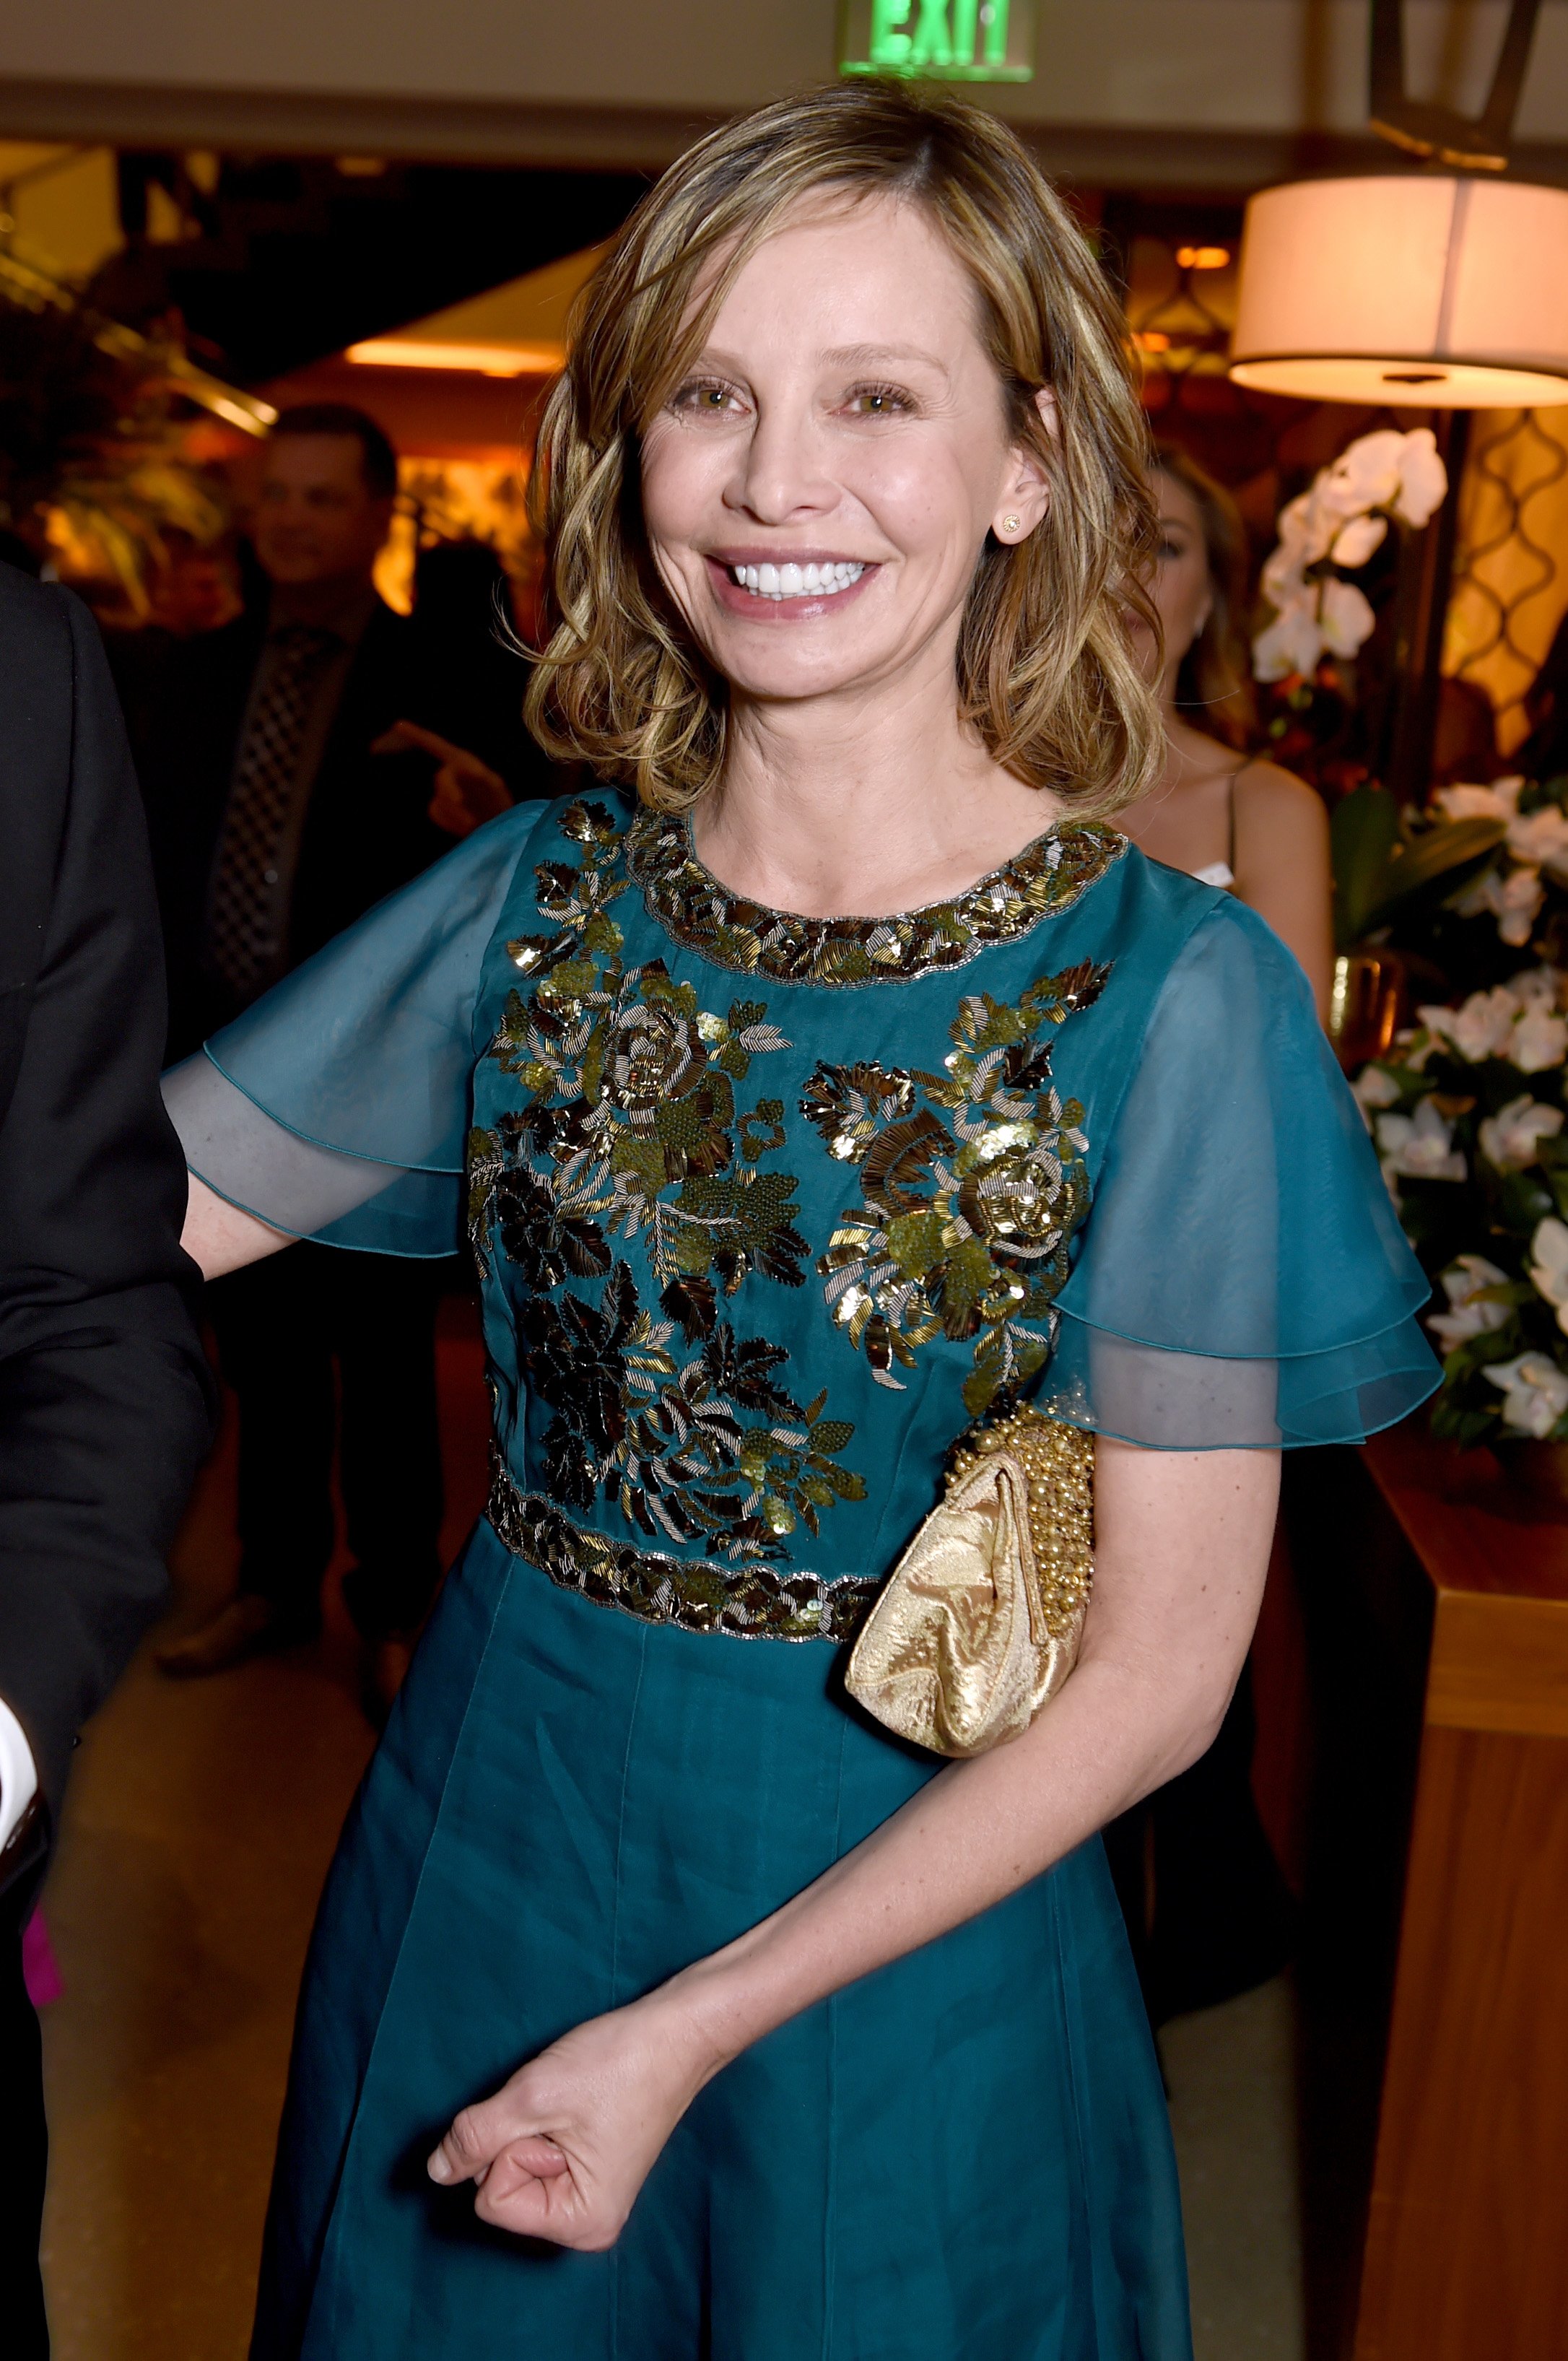 Calista Flockhart is photographed at HBO's Official Golden Globe Awards After Party at The Beverly Hilton Hotel on January 10, 2016, in Beverly Hills, California | Source: Getty Images